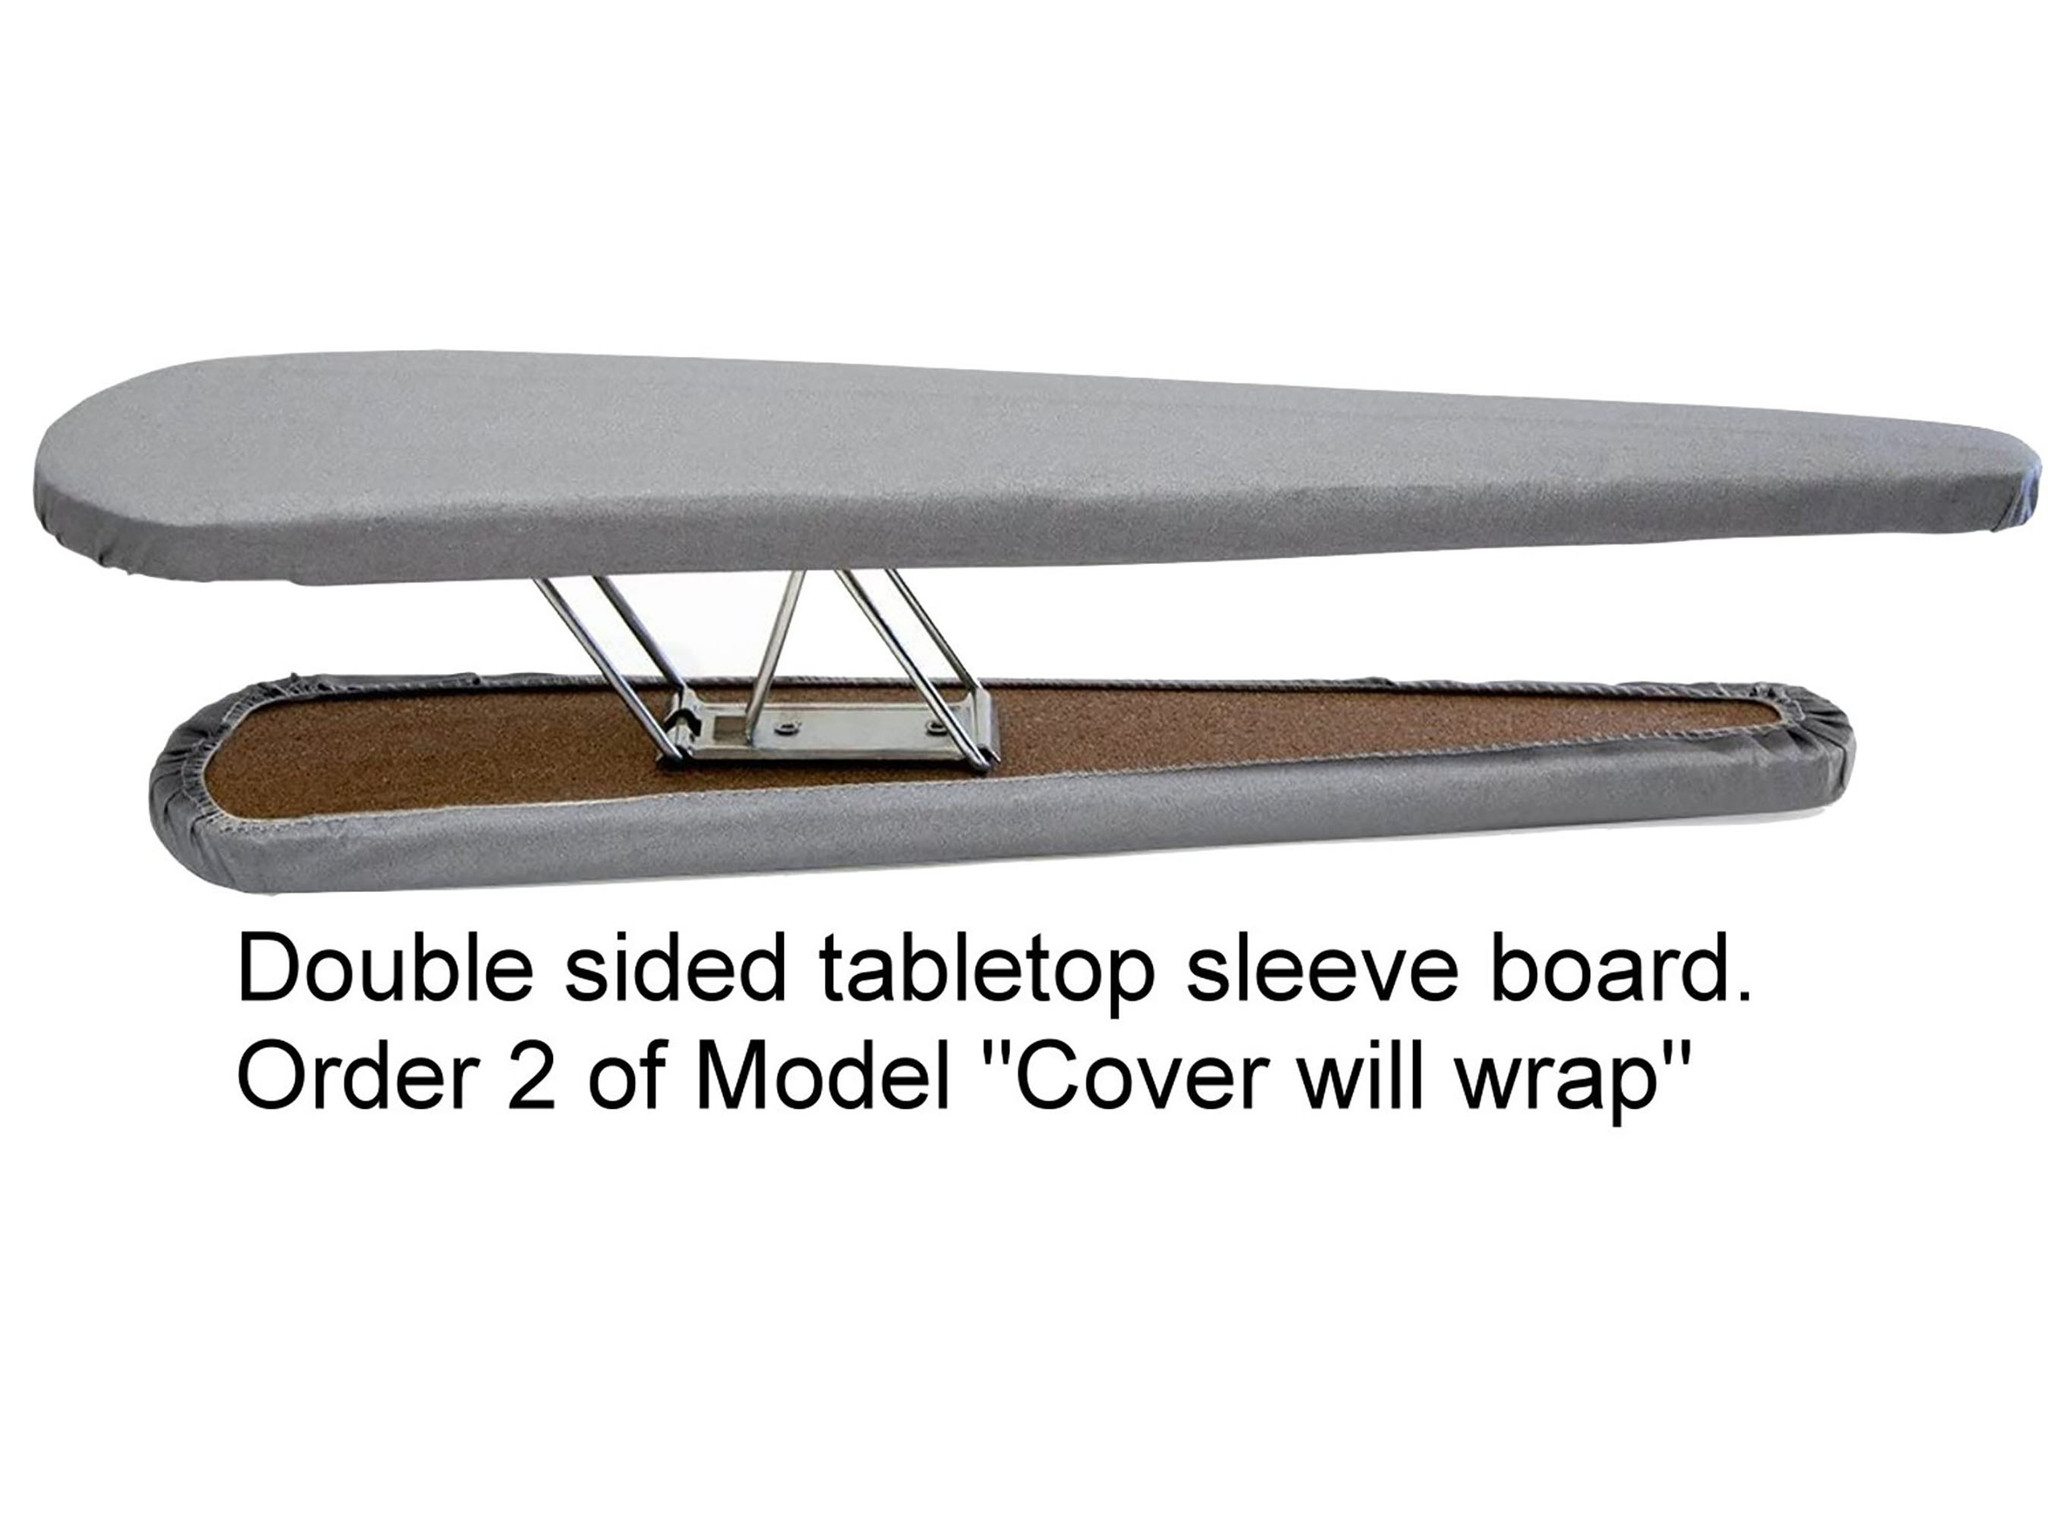 Ironing Board Covers, Pad, Solid